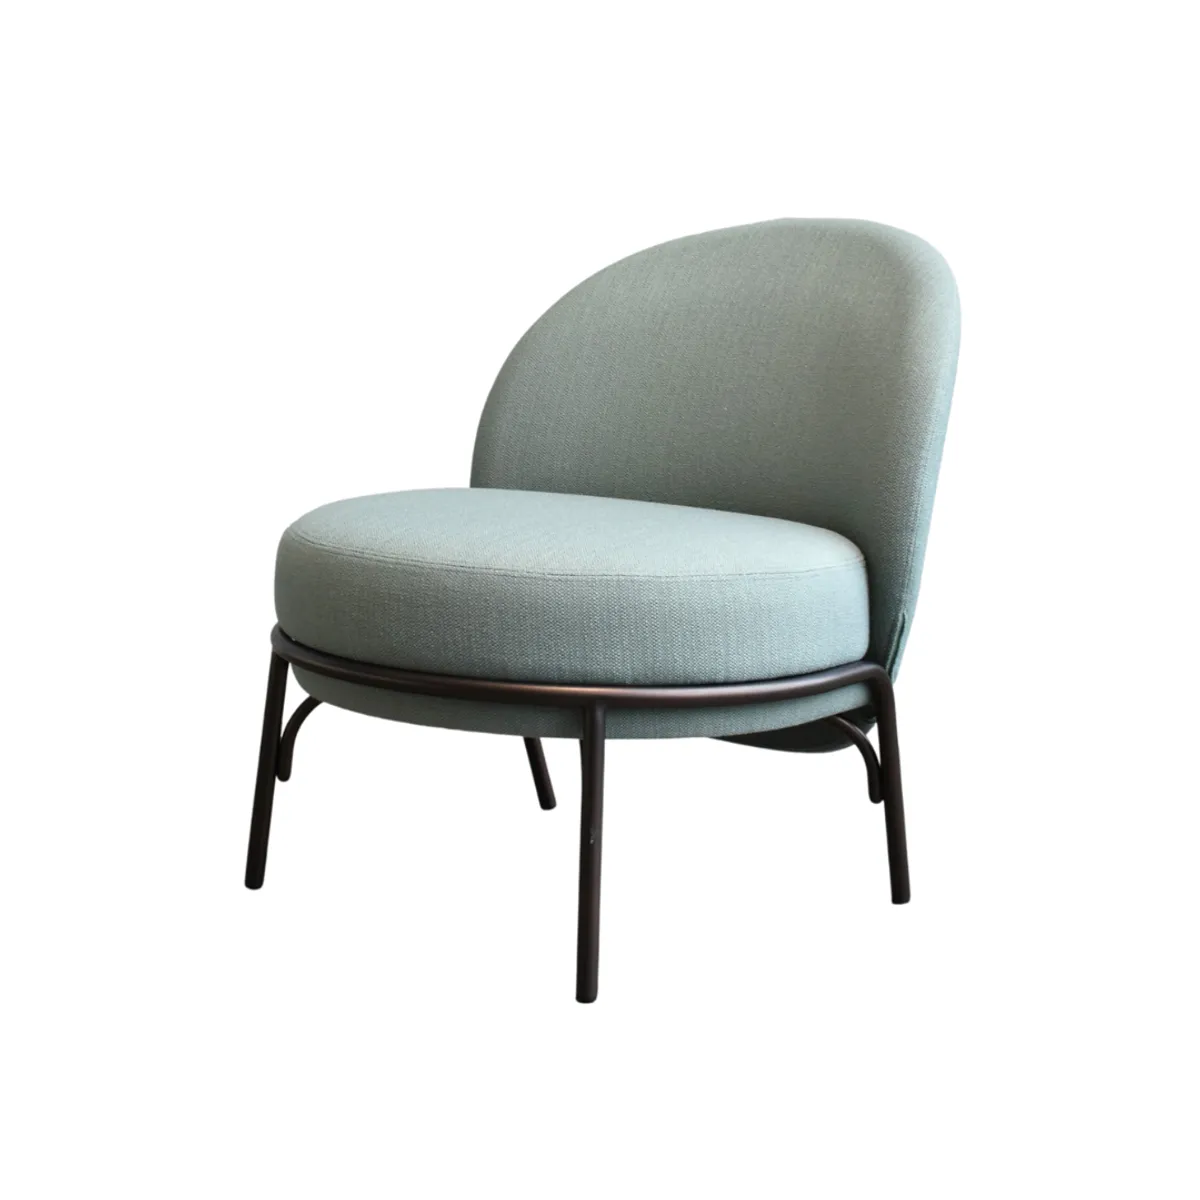 Scallop lounge chair 1